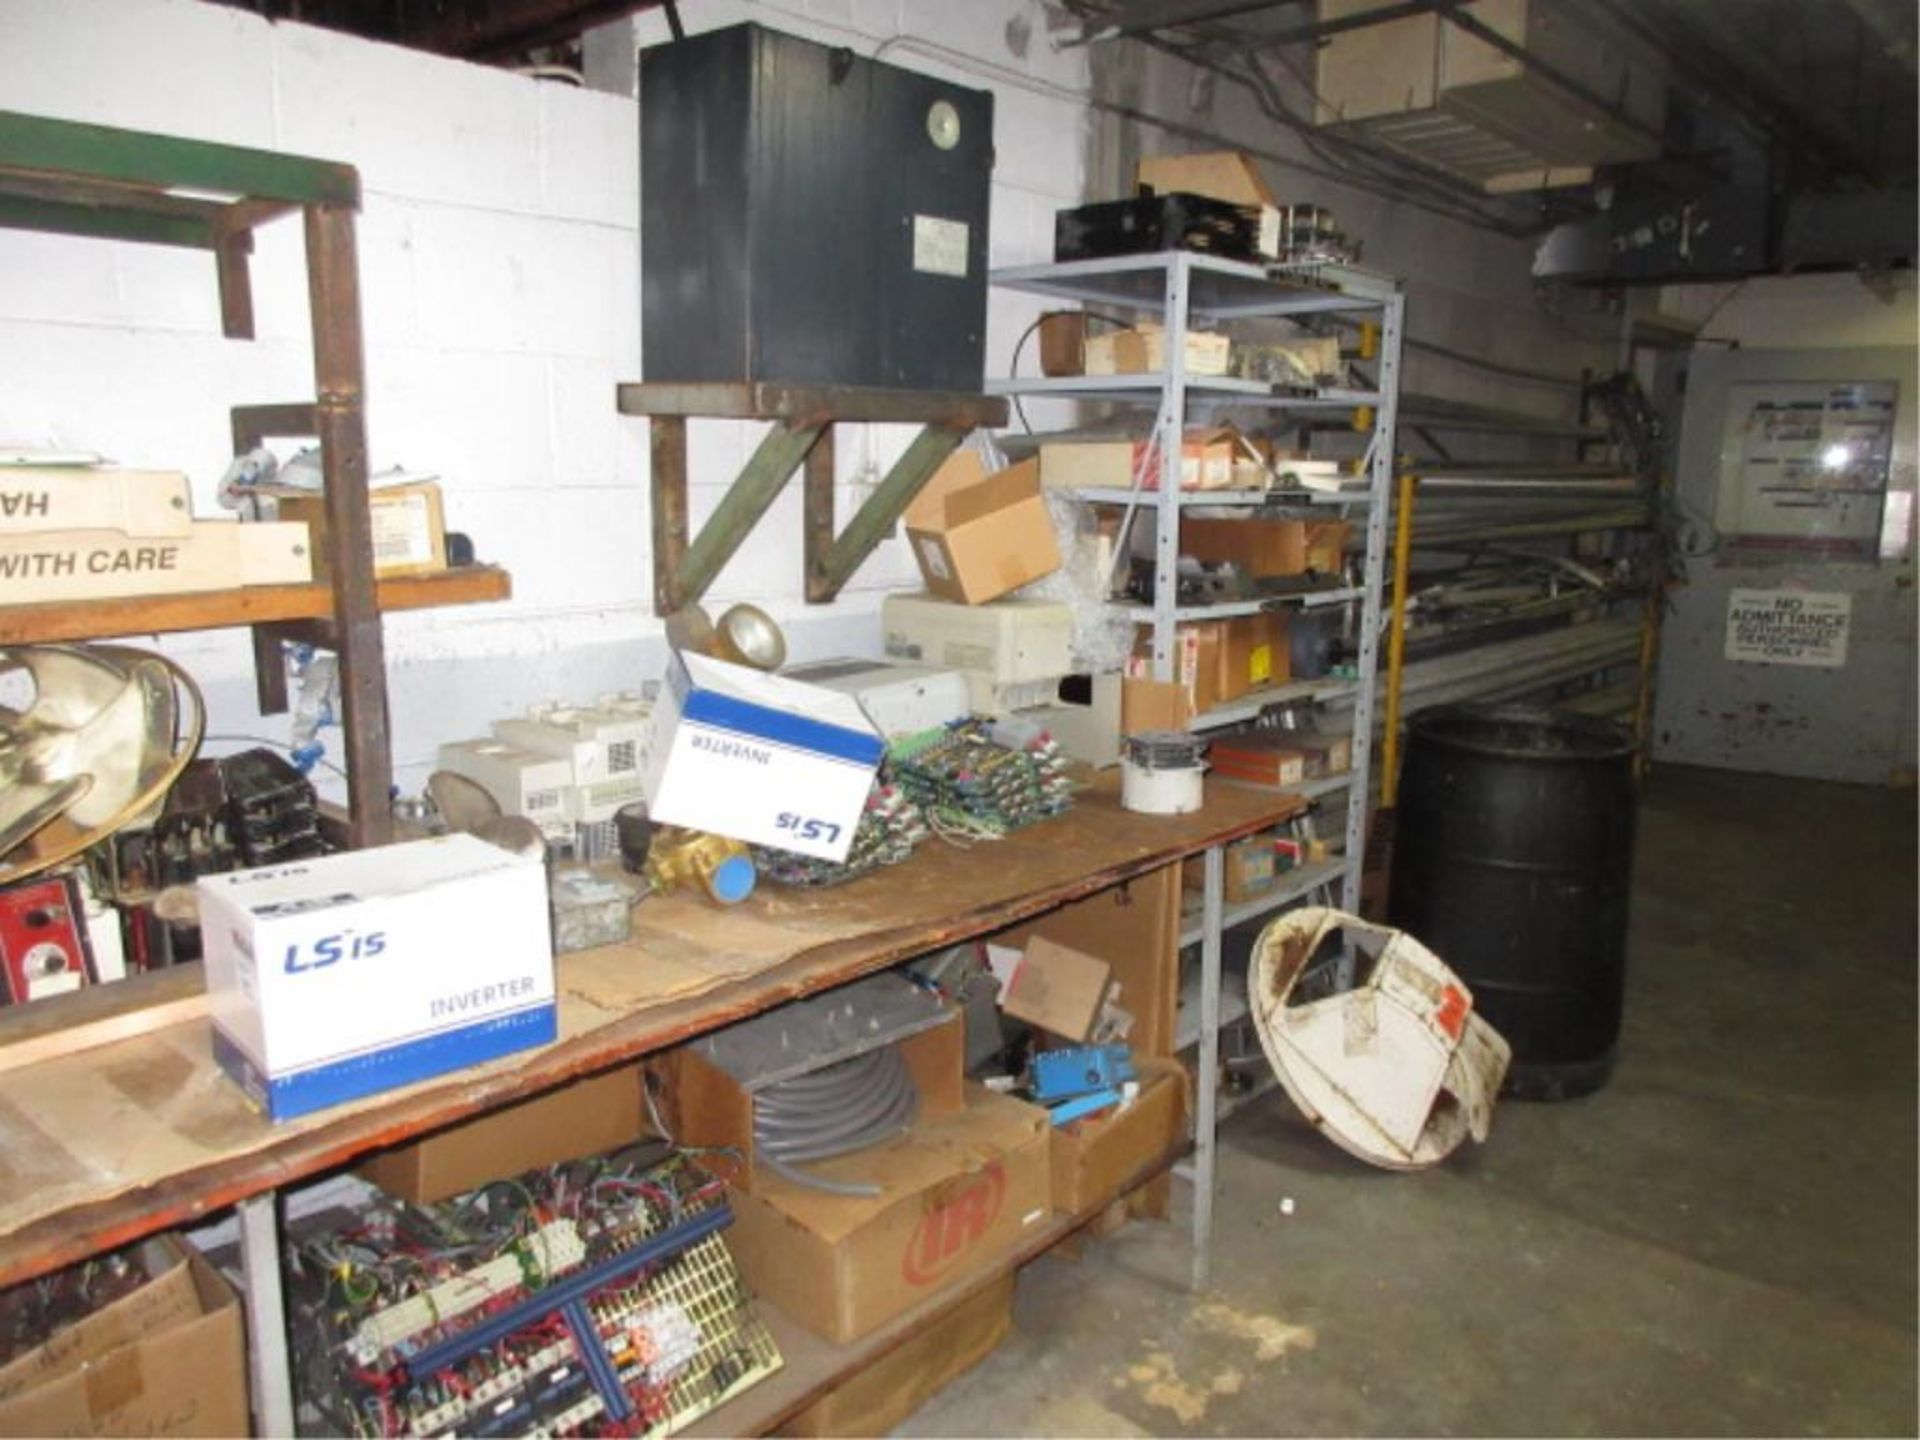 Lot Contents of Electrical Shop, includes cabinets, contents, conduit, etc. in three rooms. - Image 5 of 17